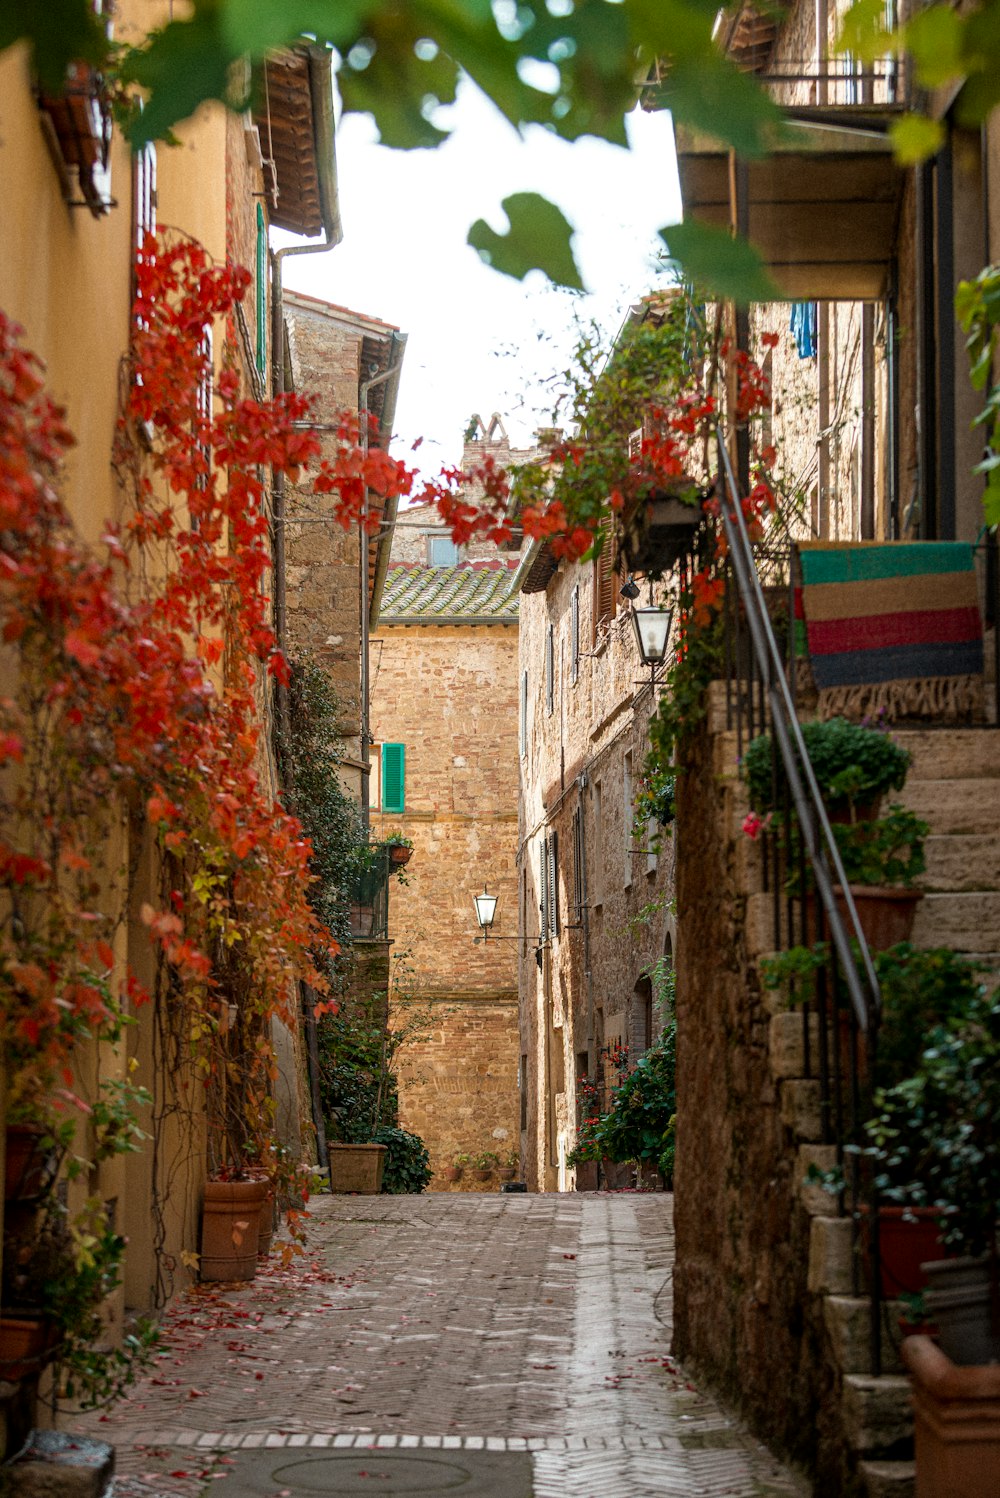 a narrow alleyway with flowers and plants on either side